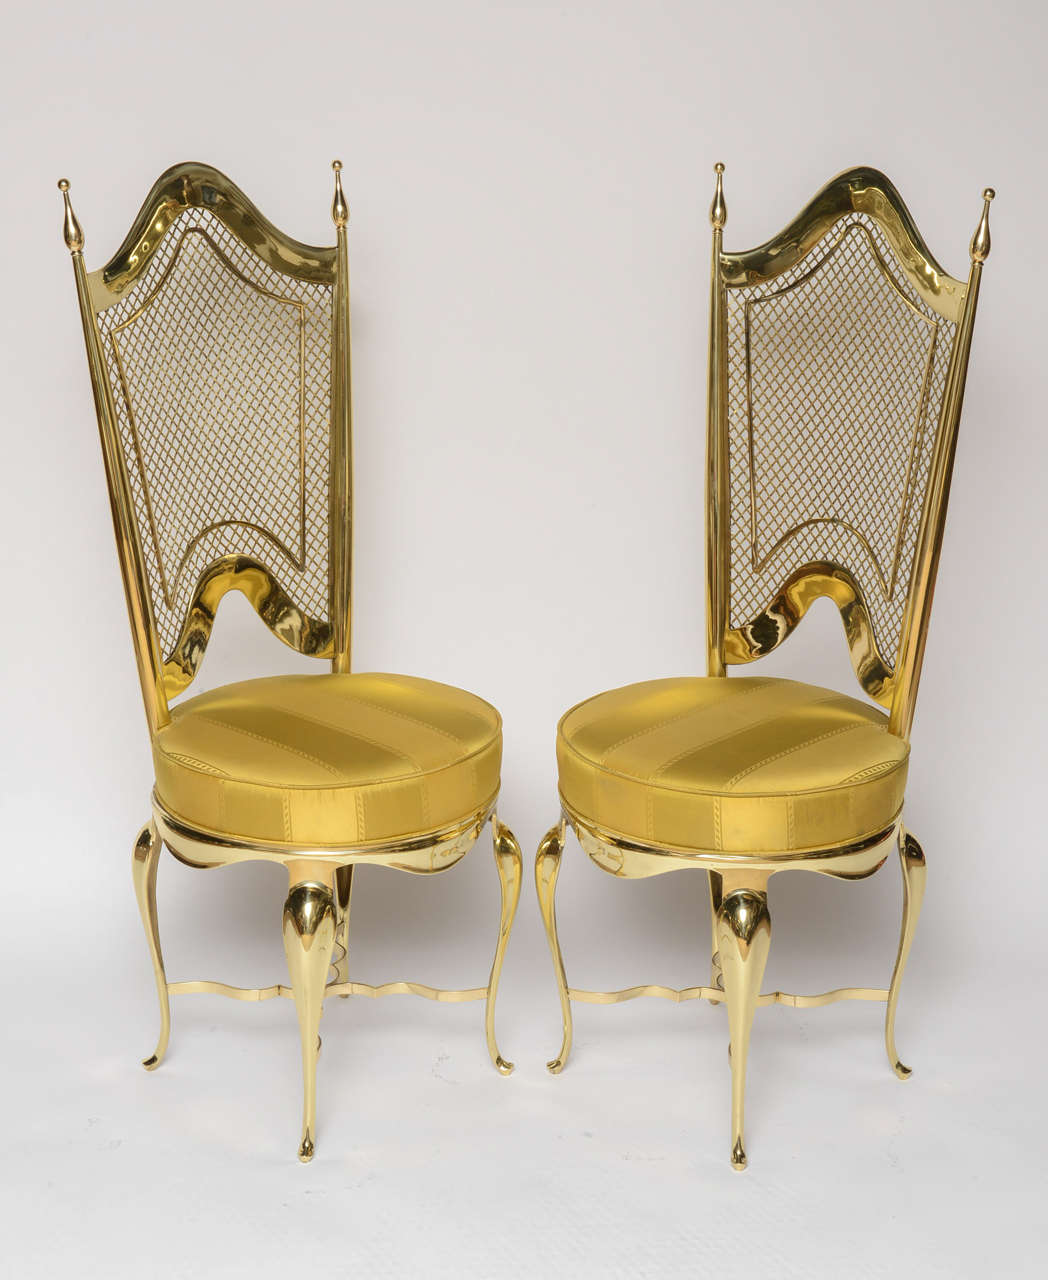 WOW, prettier in person but you can observe the amazing details about these side chairs:  polished brass throughout, lattice back, detailed finials and silk fabric seat.